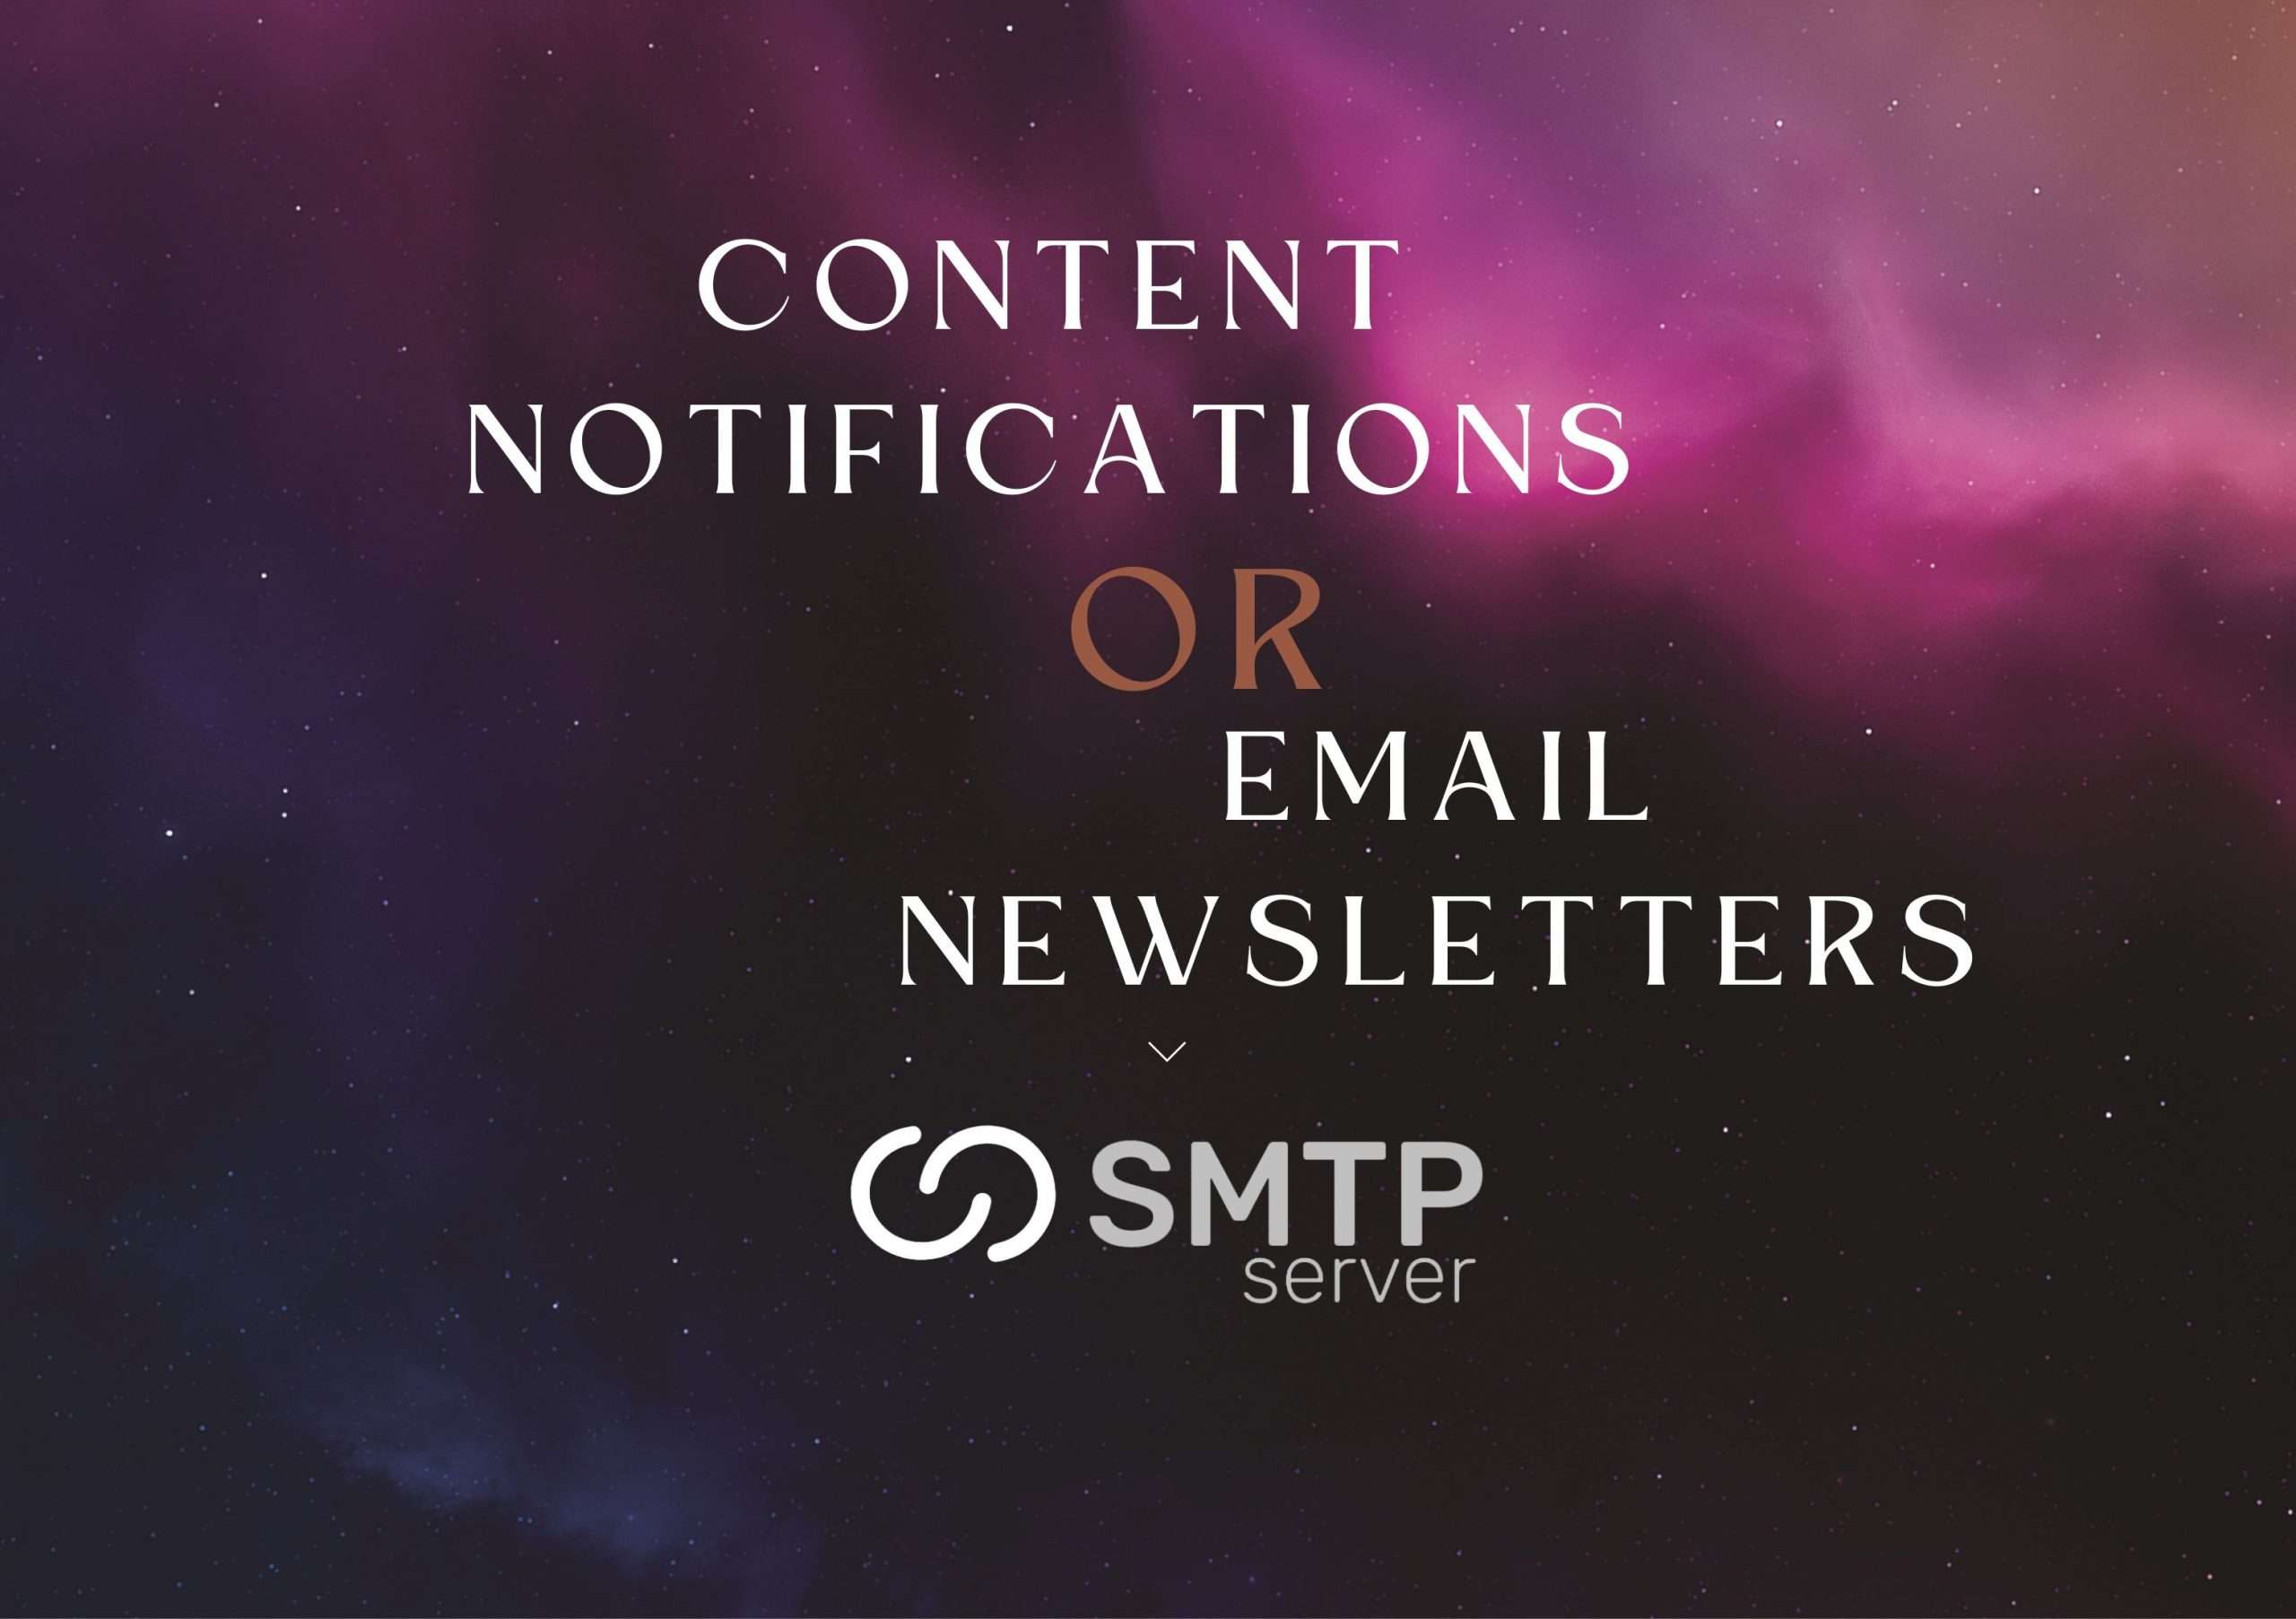 Content Notifications or Email Newsletters for Getting the Word Out?